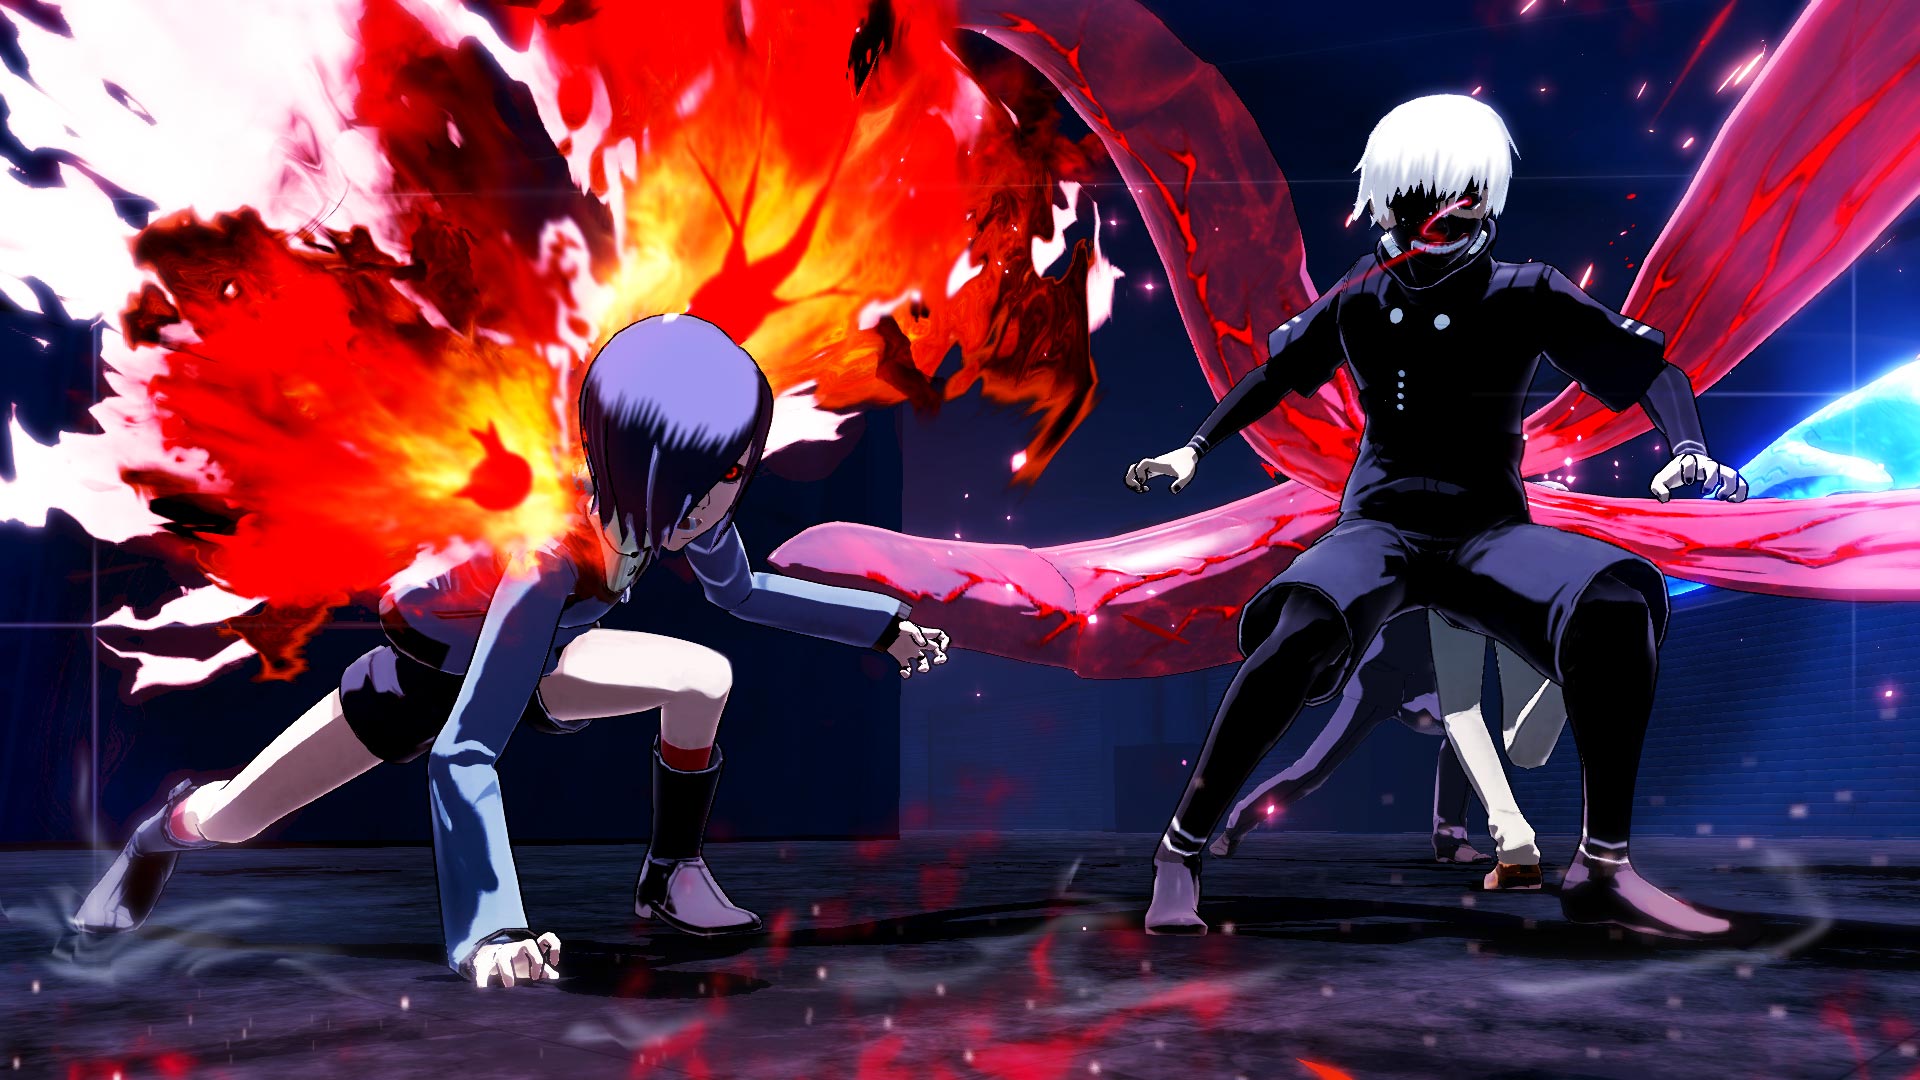 re - game by Rena-666  Tokyo ghoul, Crazy games, Anime